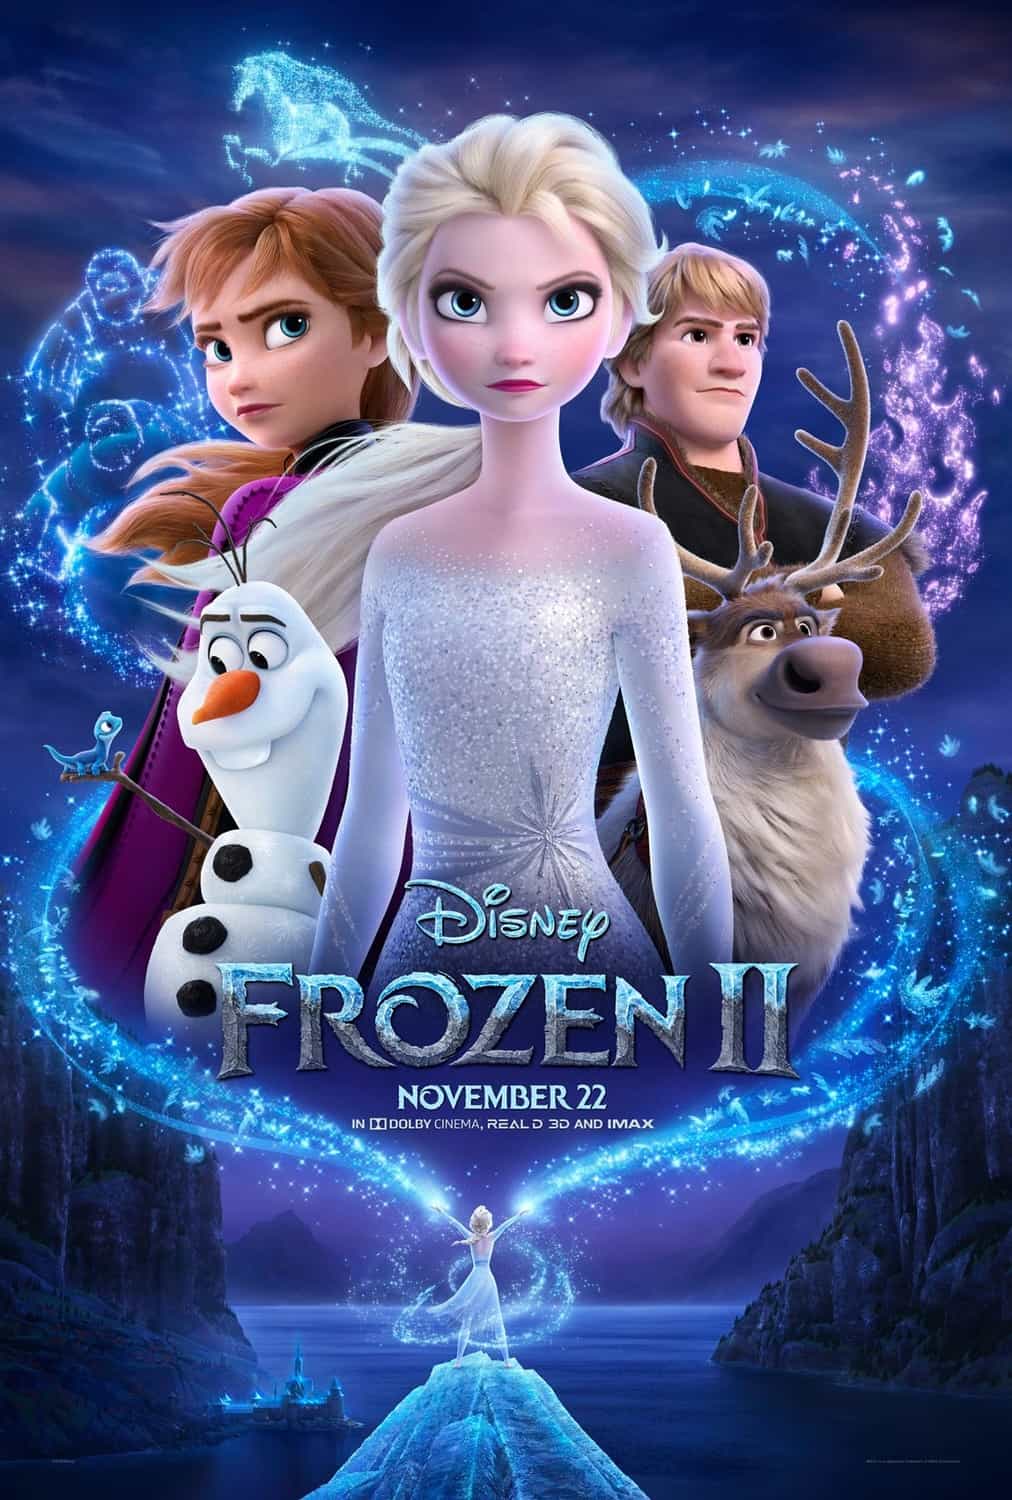 A look at the UK home entertainment top 10 where Frozen II is the top movie of the week